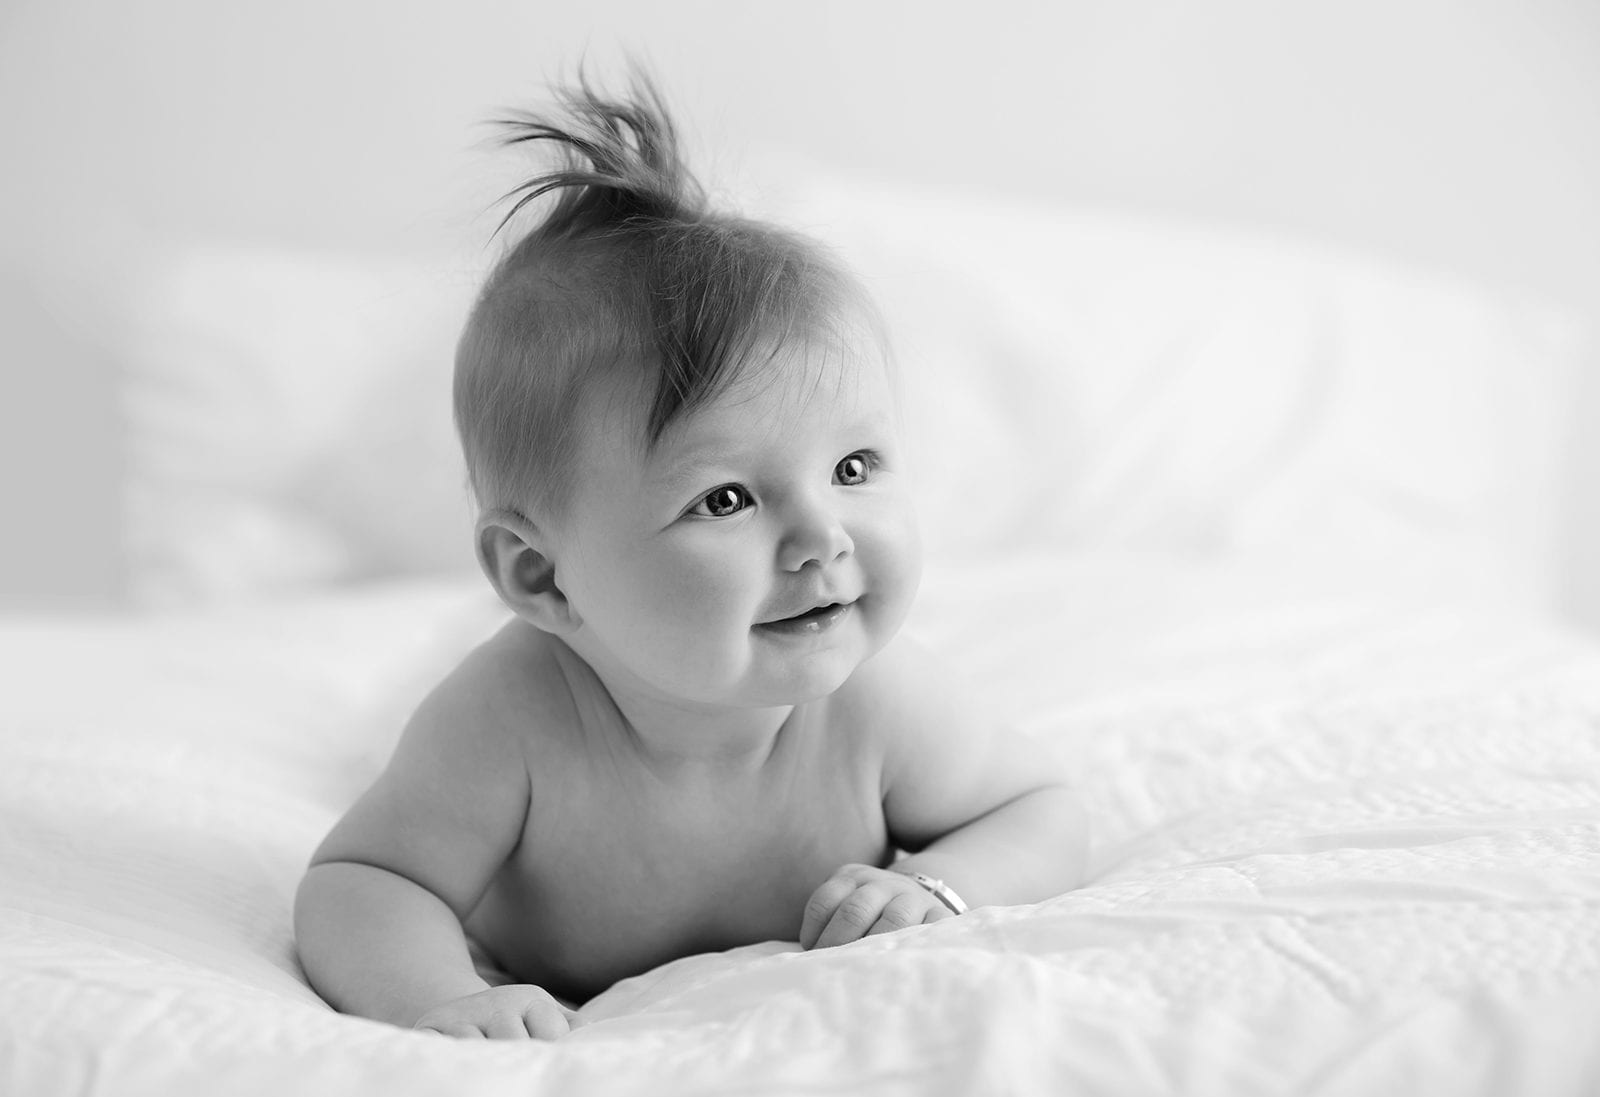 Baby photographed with sticking-up hair